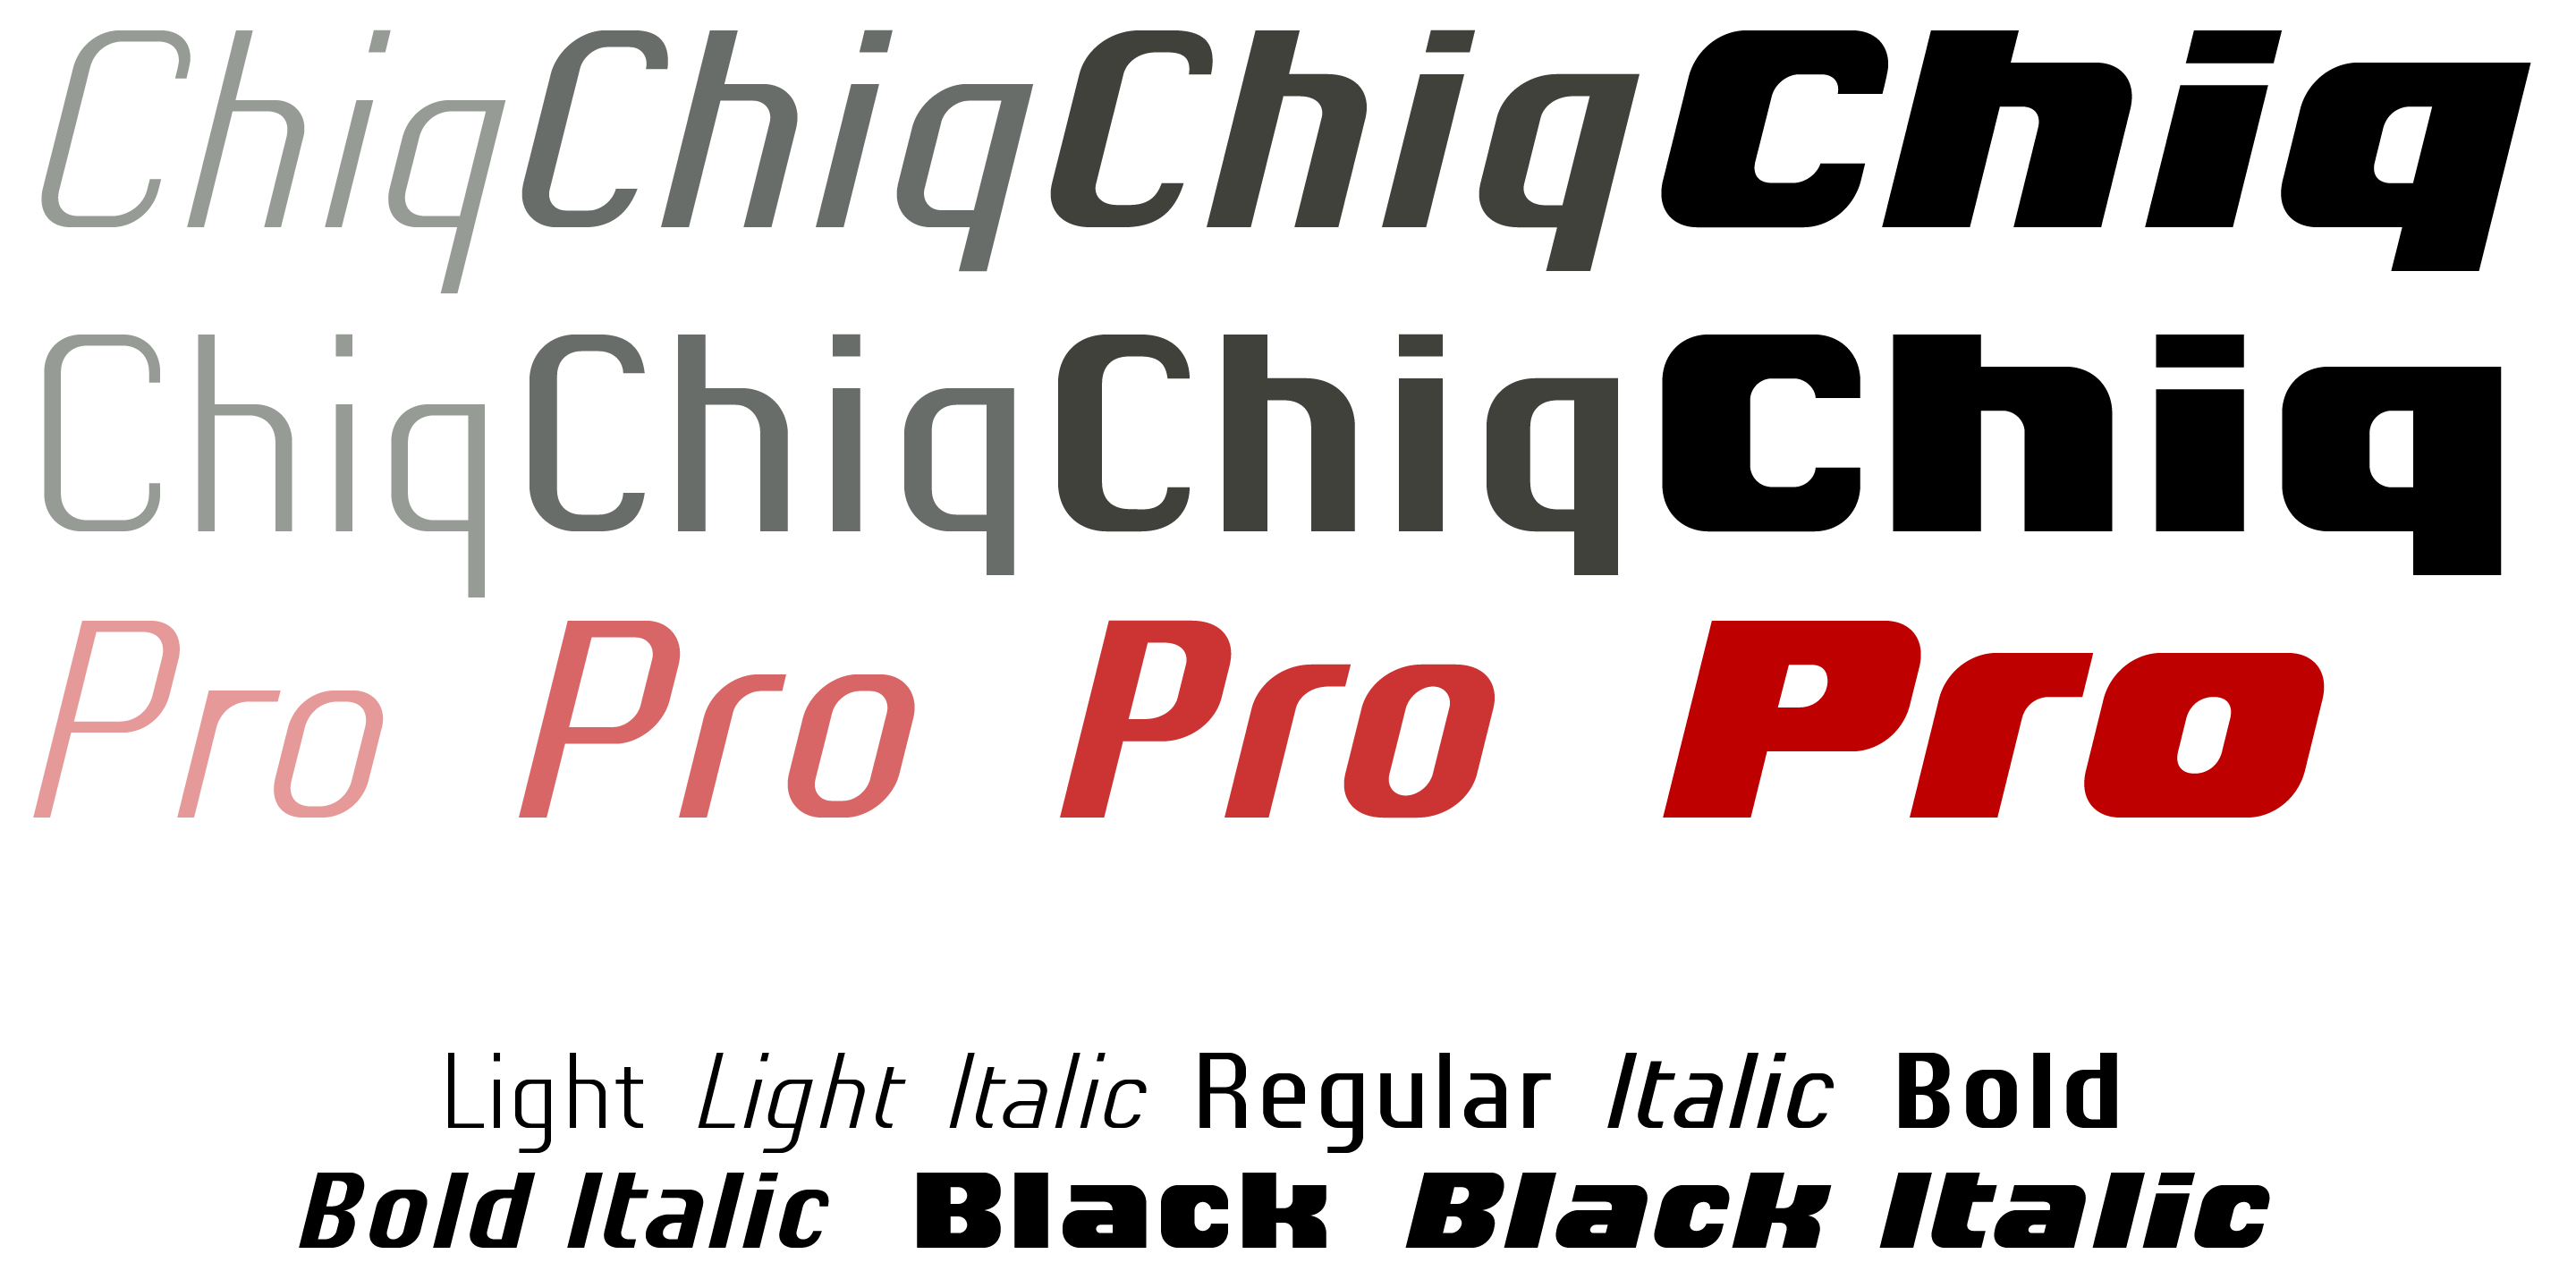 Ideas of Modern Fonts to Use